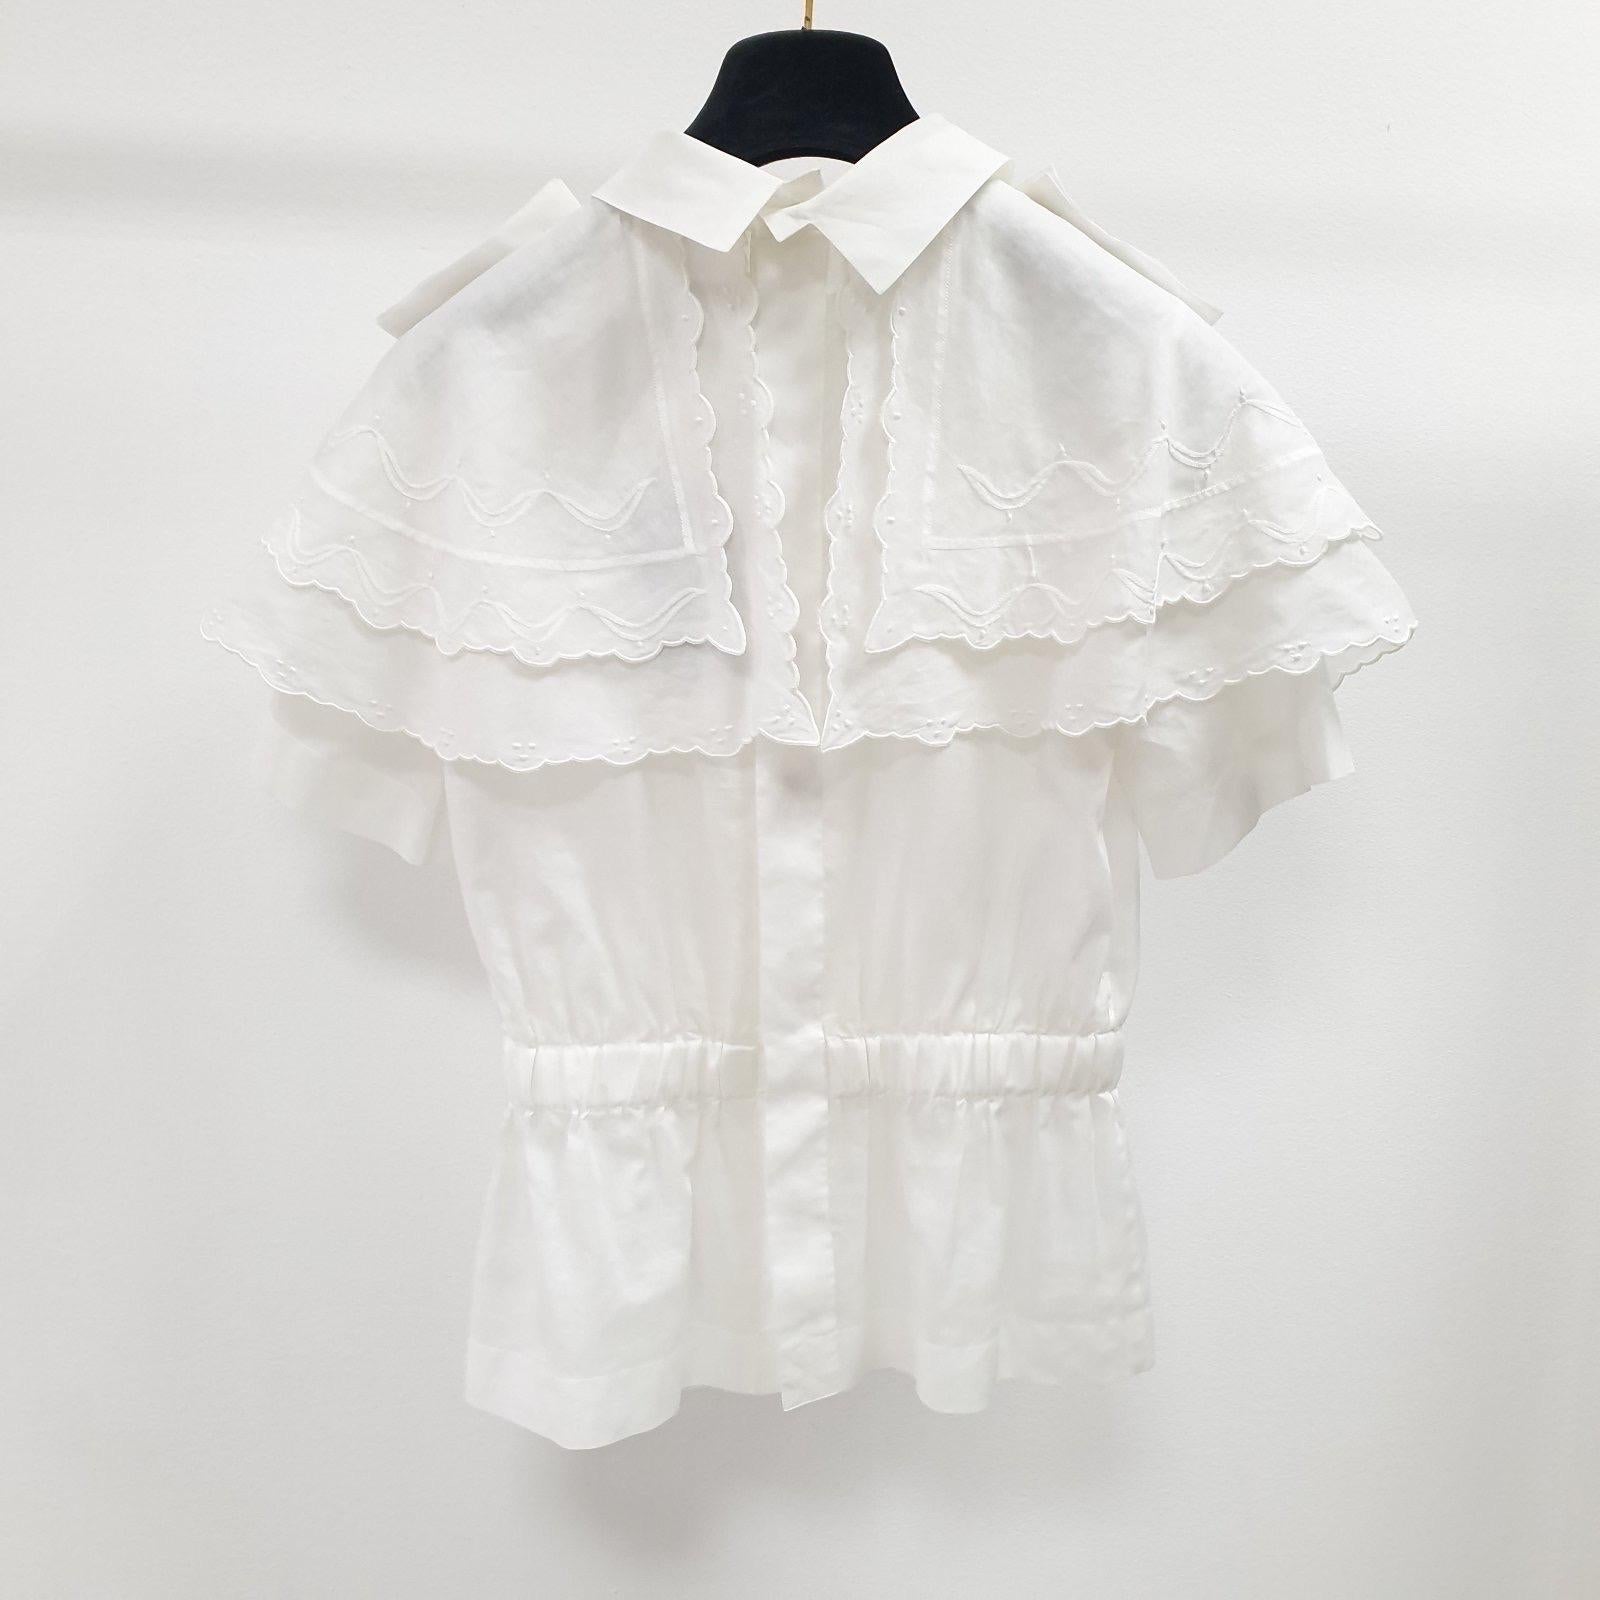 The house of Chanel brings to you this luxuriously detailed top that can be flaunted for a stylish look of grace. 
Crafted from cotton that is enhanced with scalloped overlays and camellia motifs on the epaulets, this top can easily be worn with